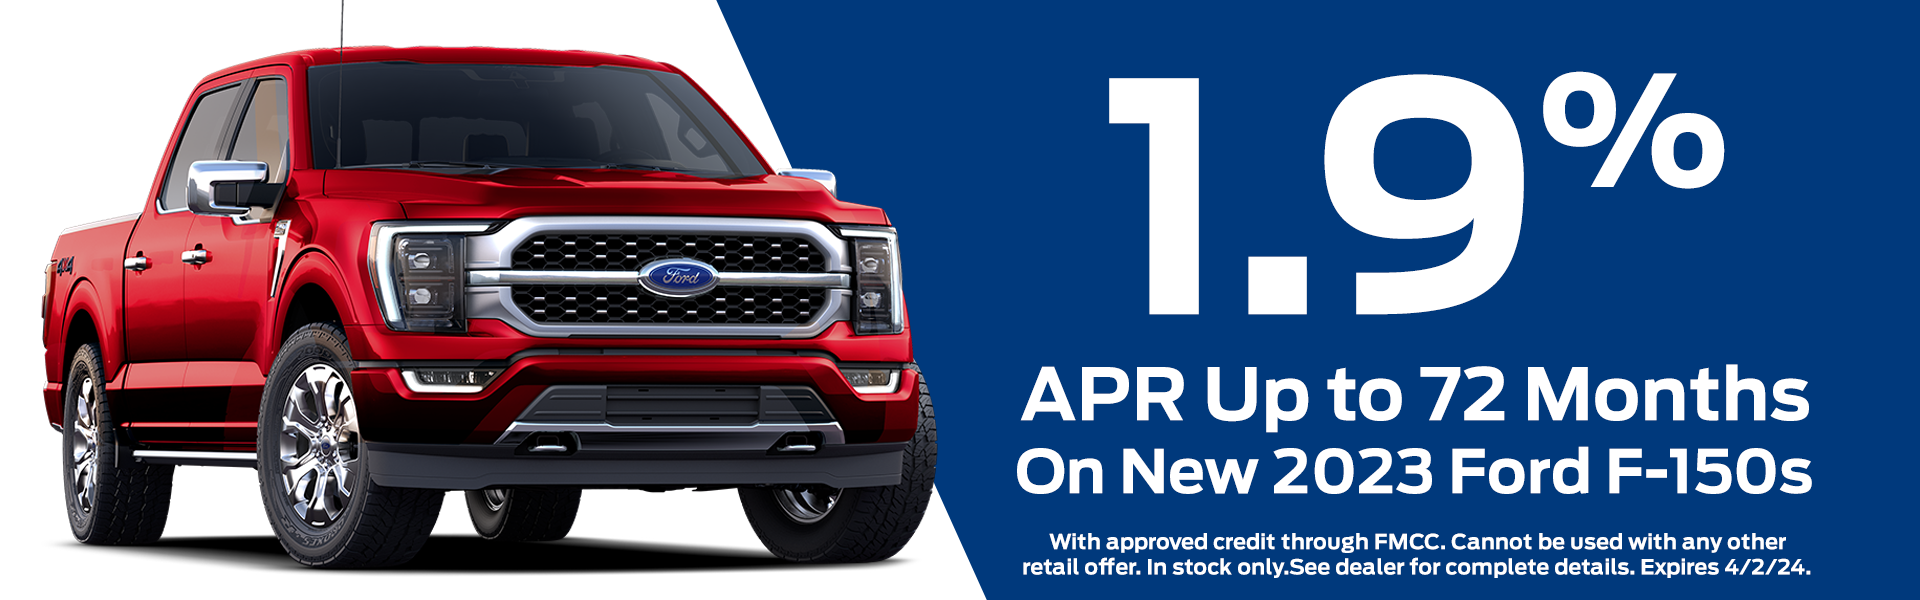 1.9% APR Up to 72 Months on New 2023 F-150s